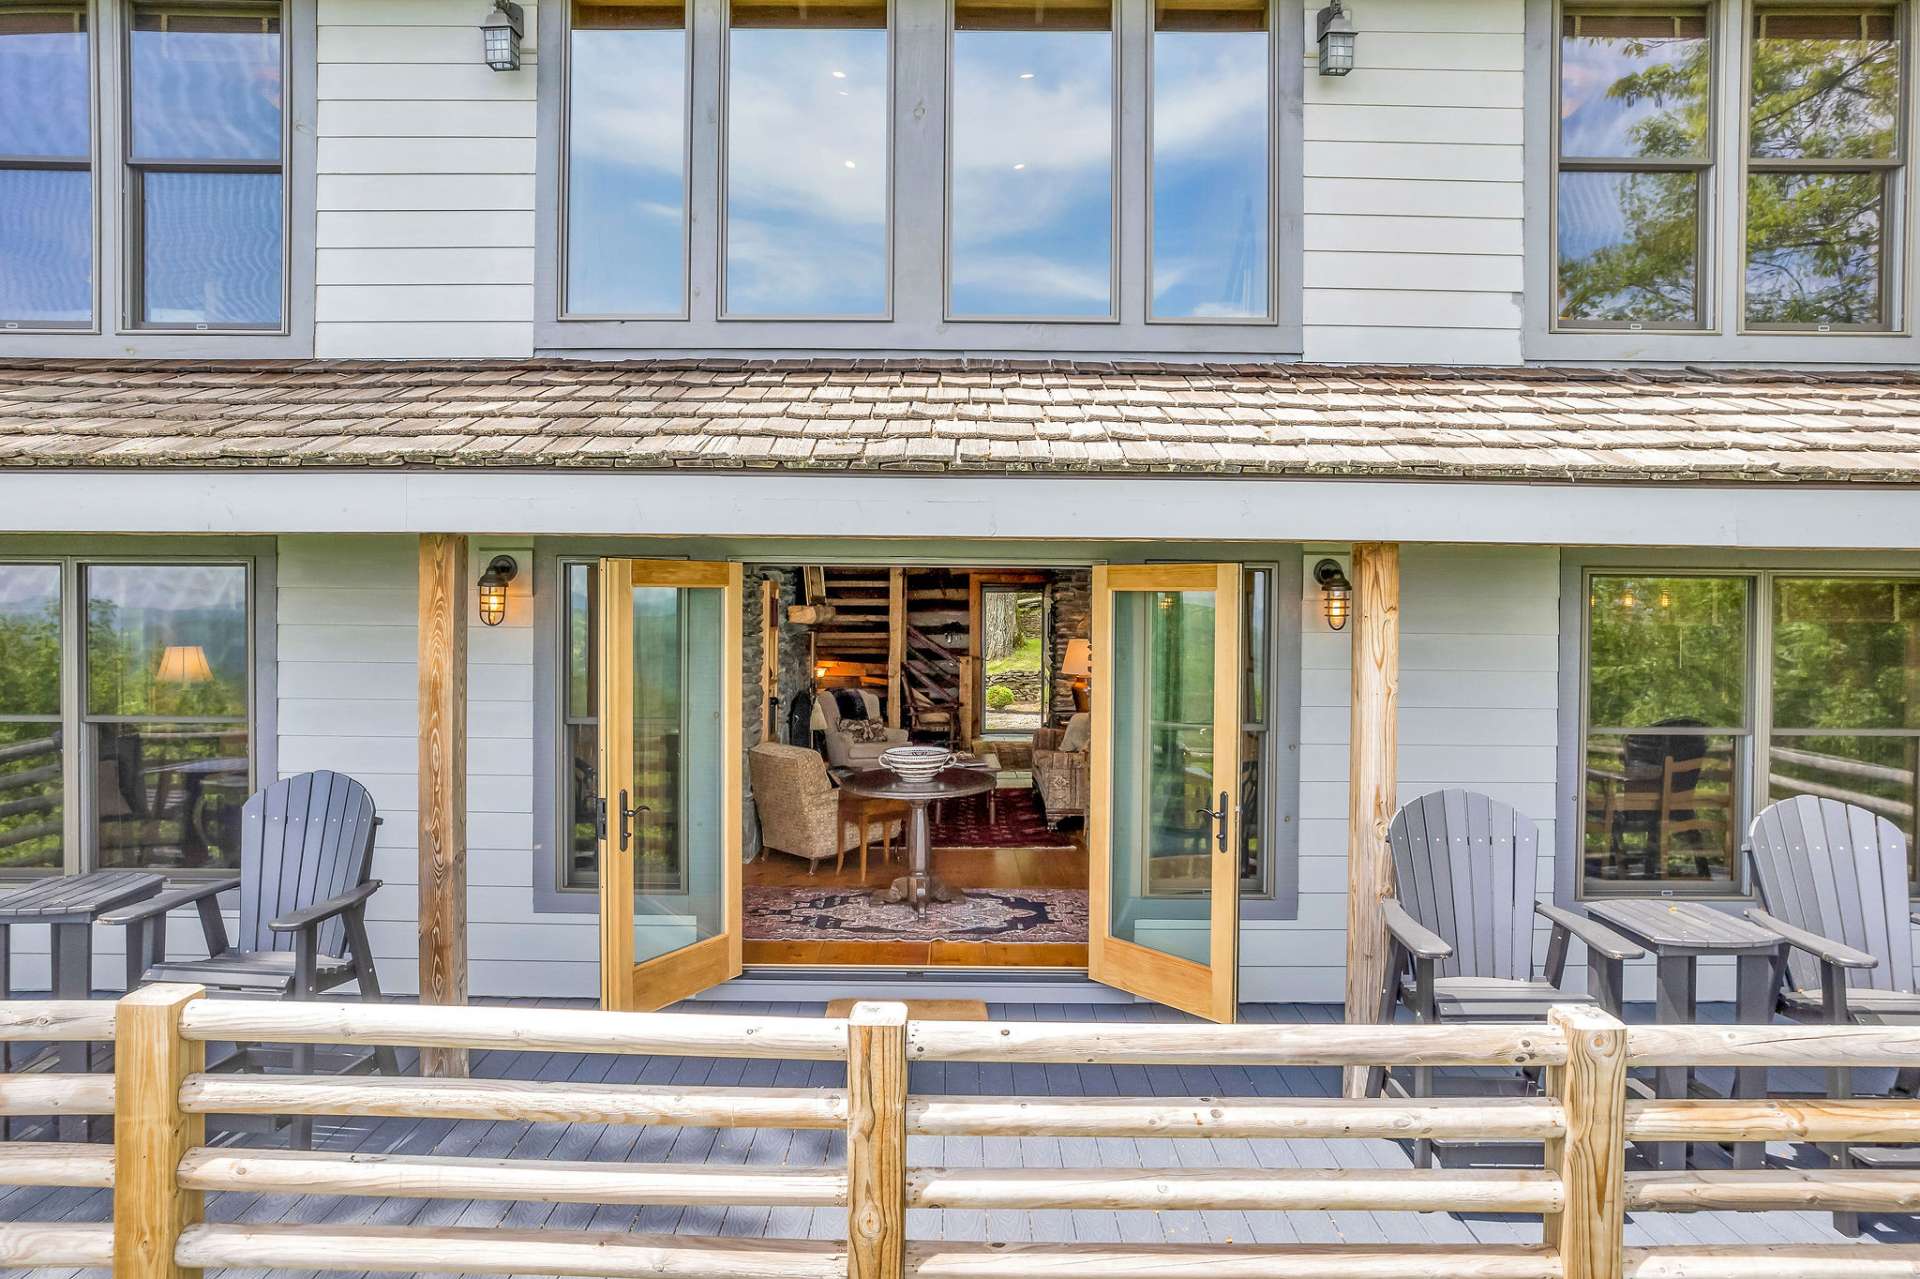 Greatly expand your living space three seasons of the year with approximately 1400 sq. ft. of decks & porches.